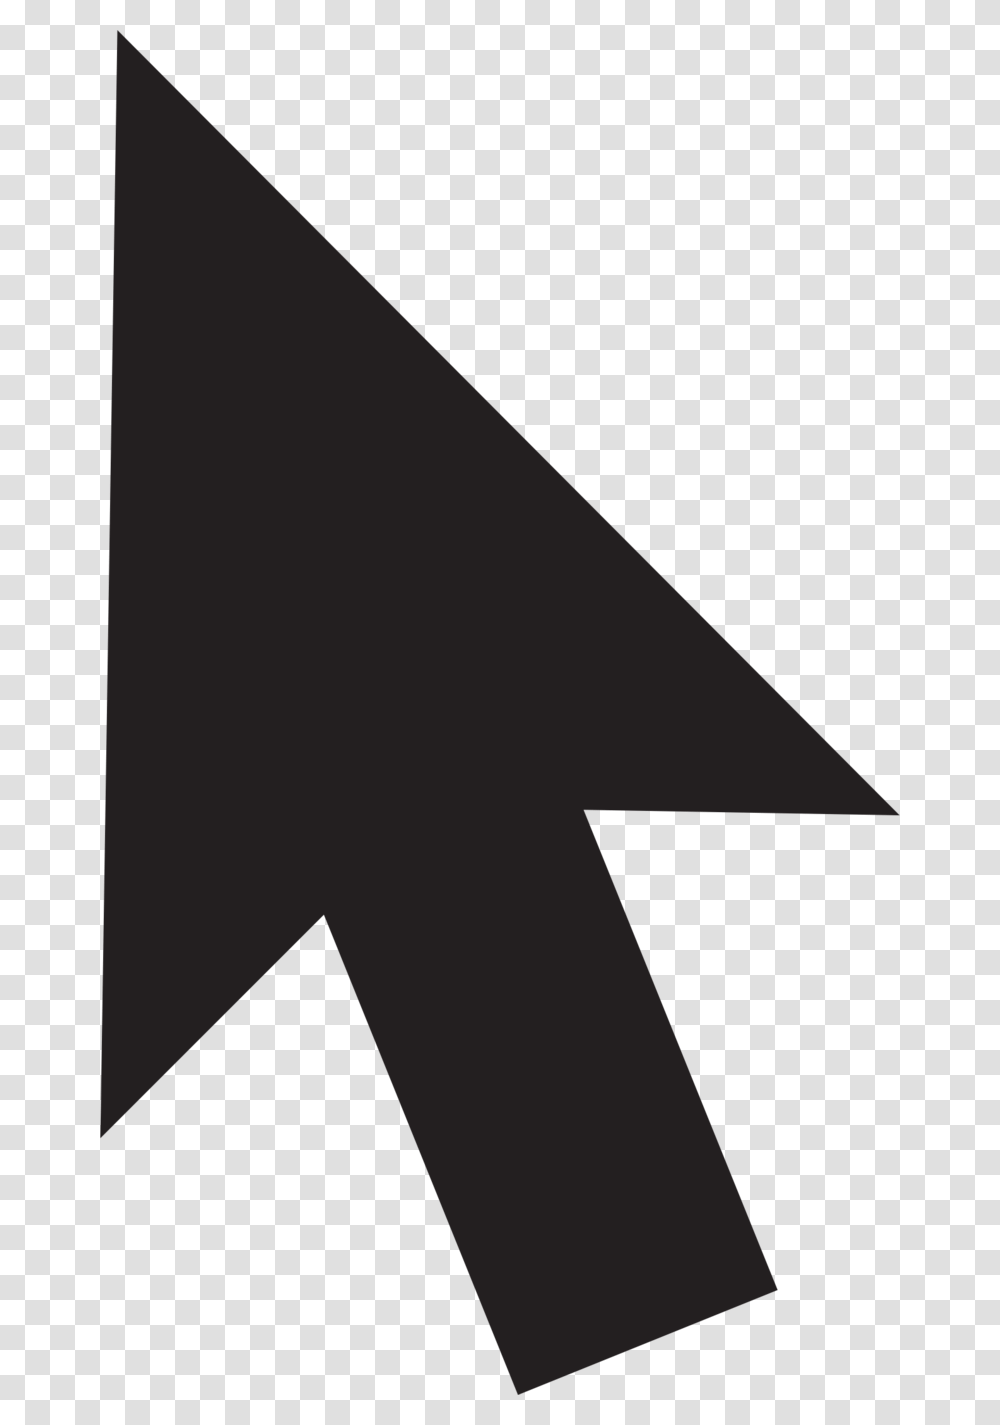 Mouse Cursor Image With Cursor Mouse Icon, Triangle, Star Symbol Transparent Png